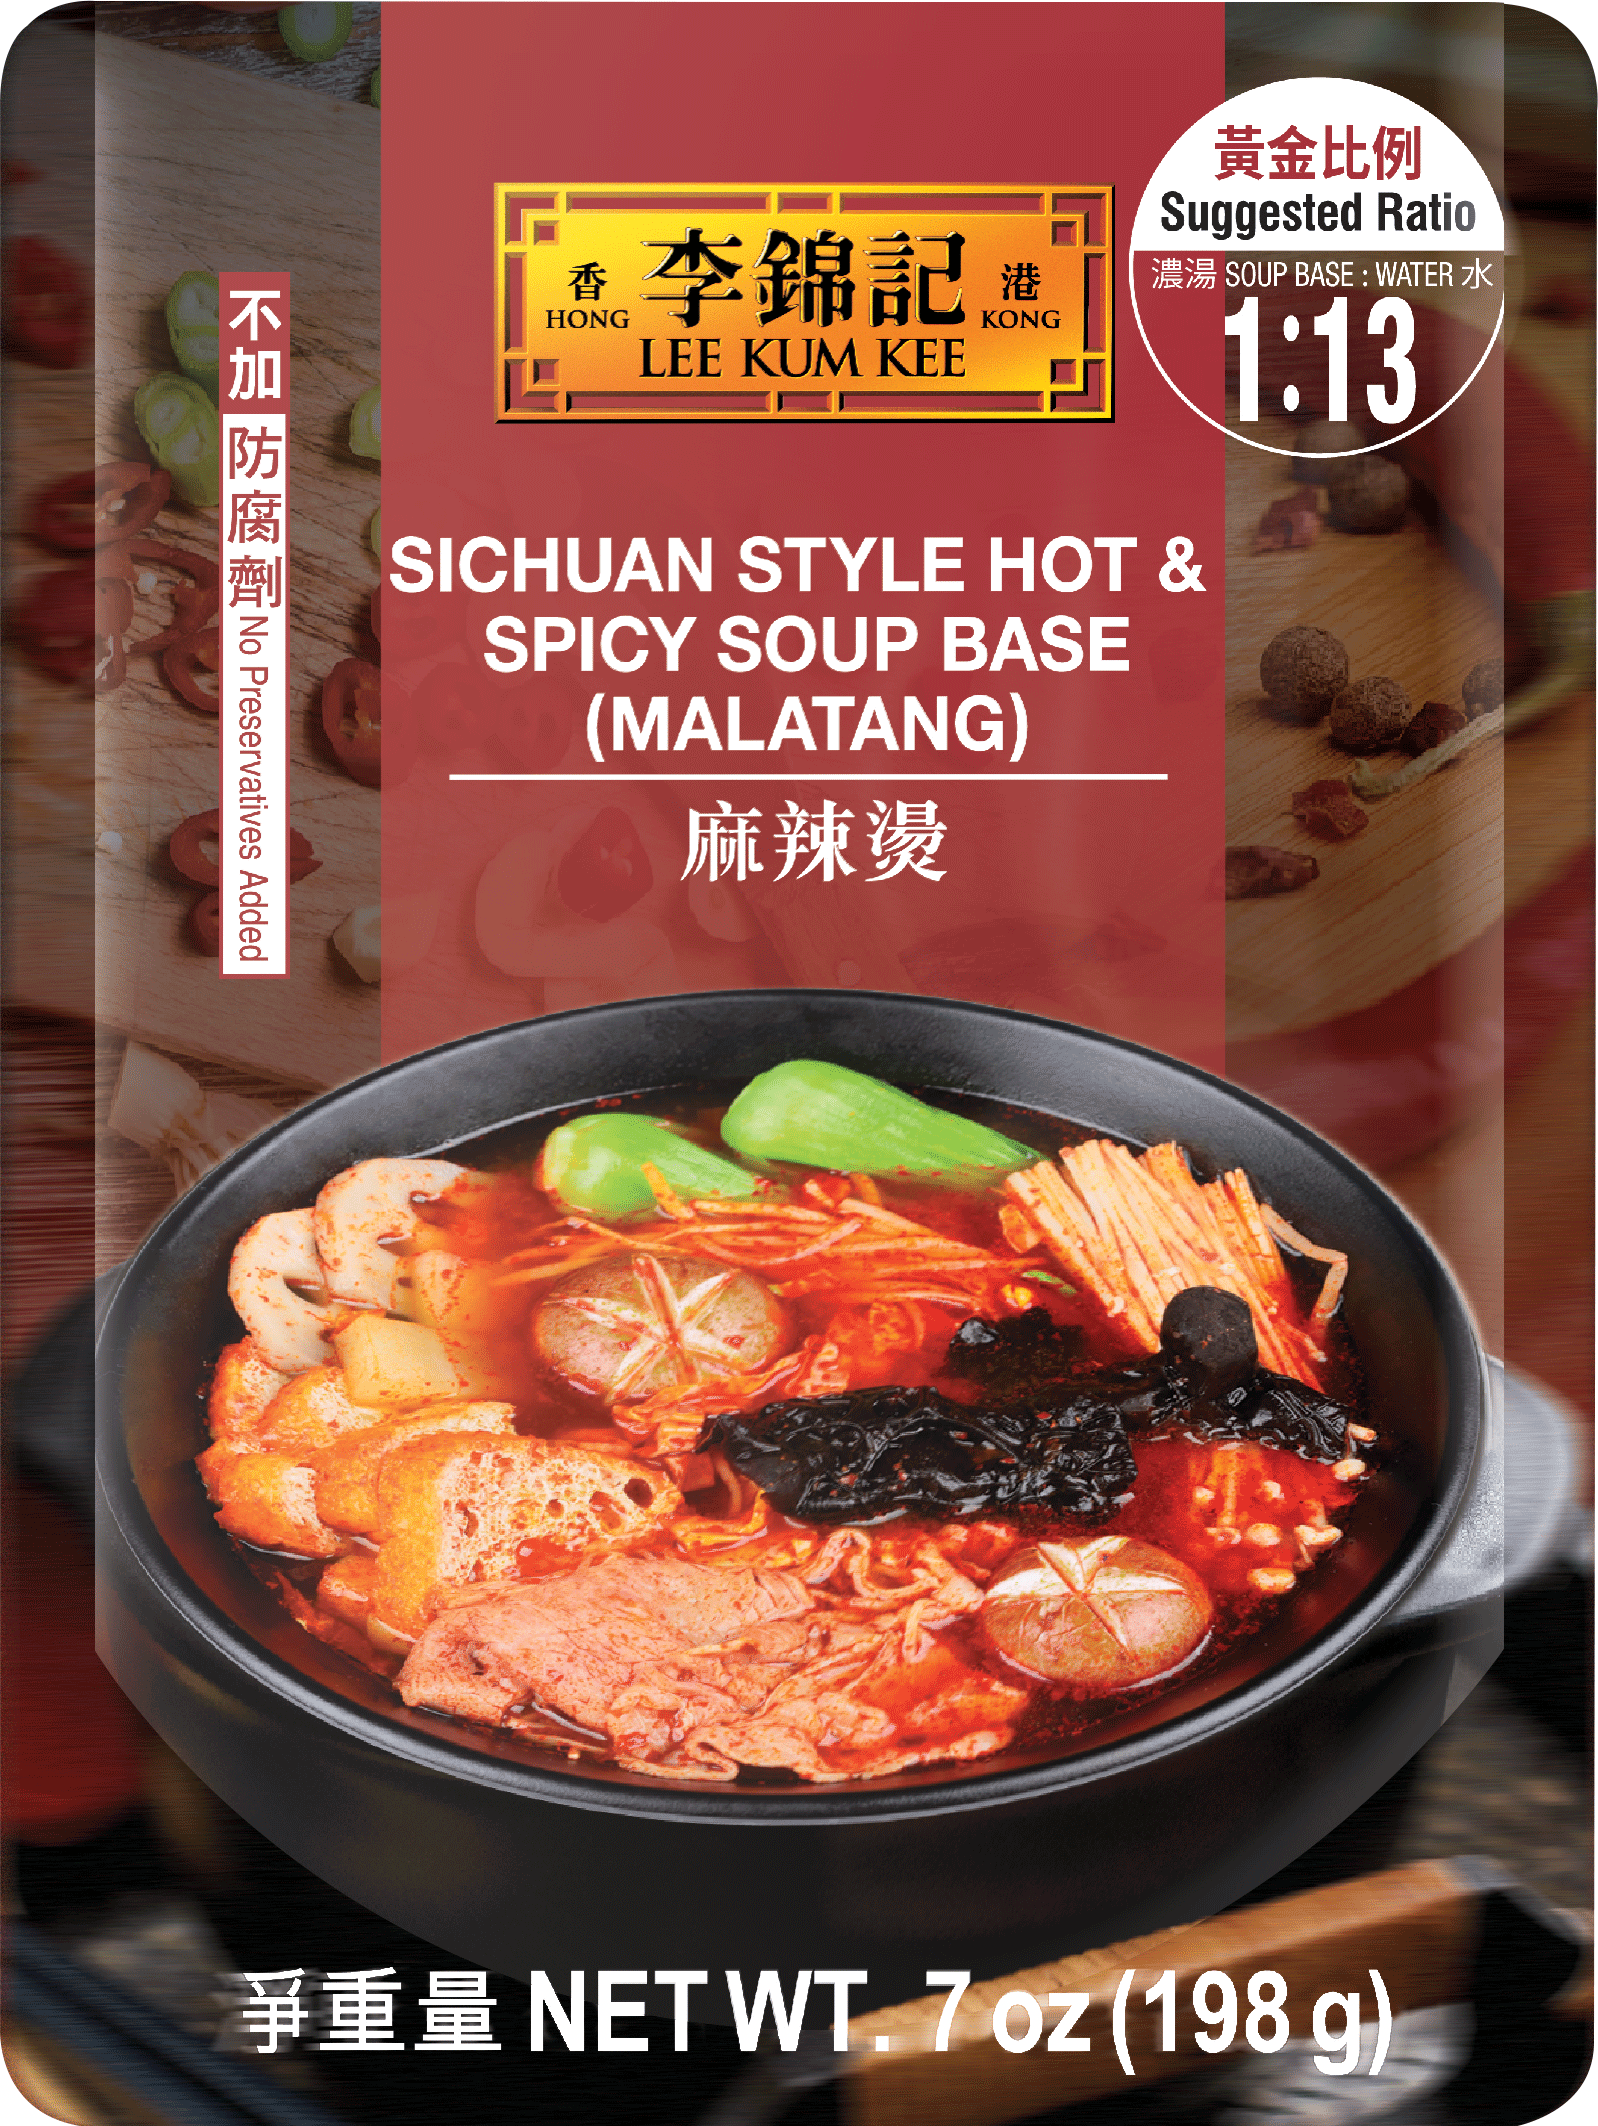 Sichuan Style Hot & Spicy Soup Base (Malatang), 7 oz (198 g)